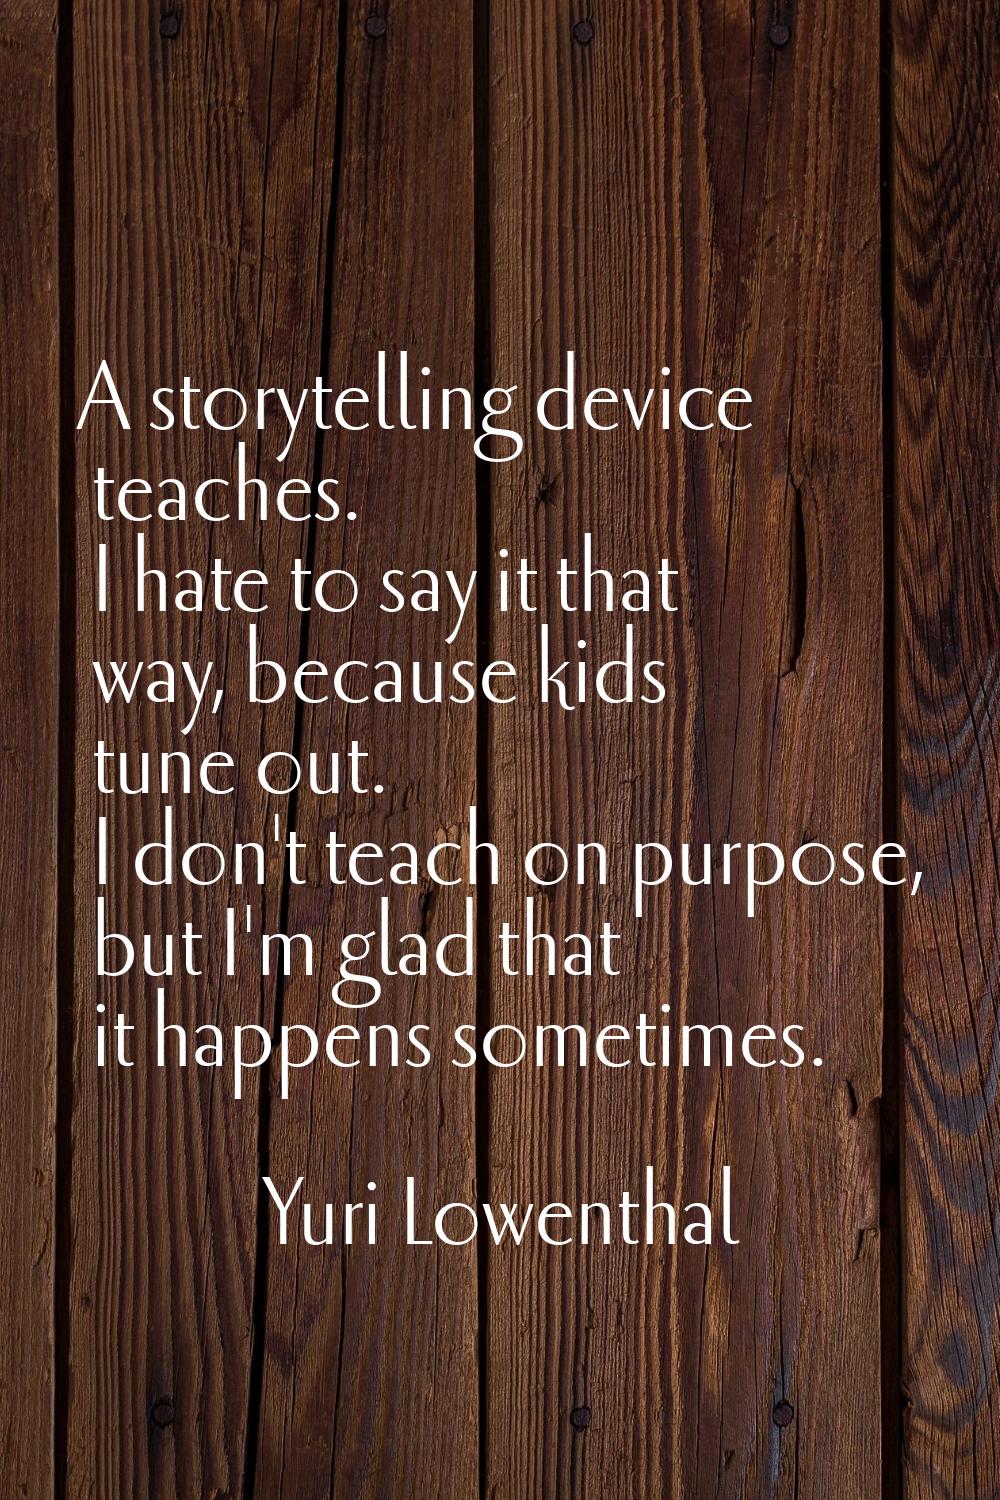 A storytelling device teaches. I hate to say it that way, because kids tune out. I don't teach on p